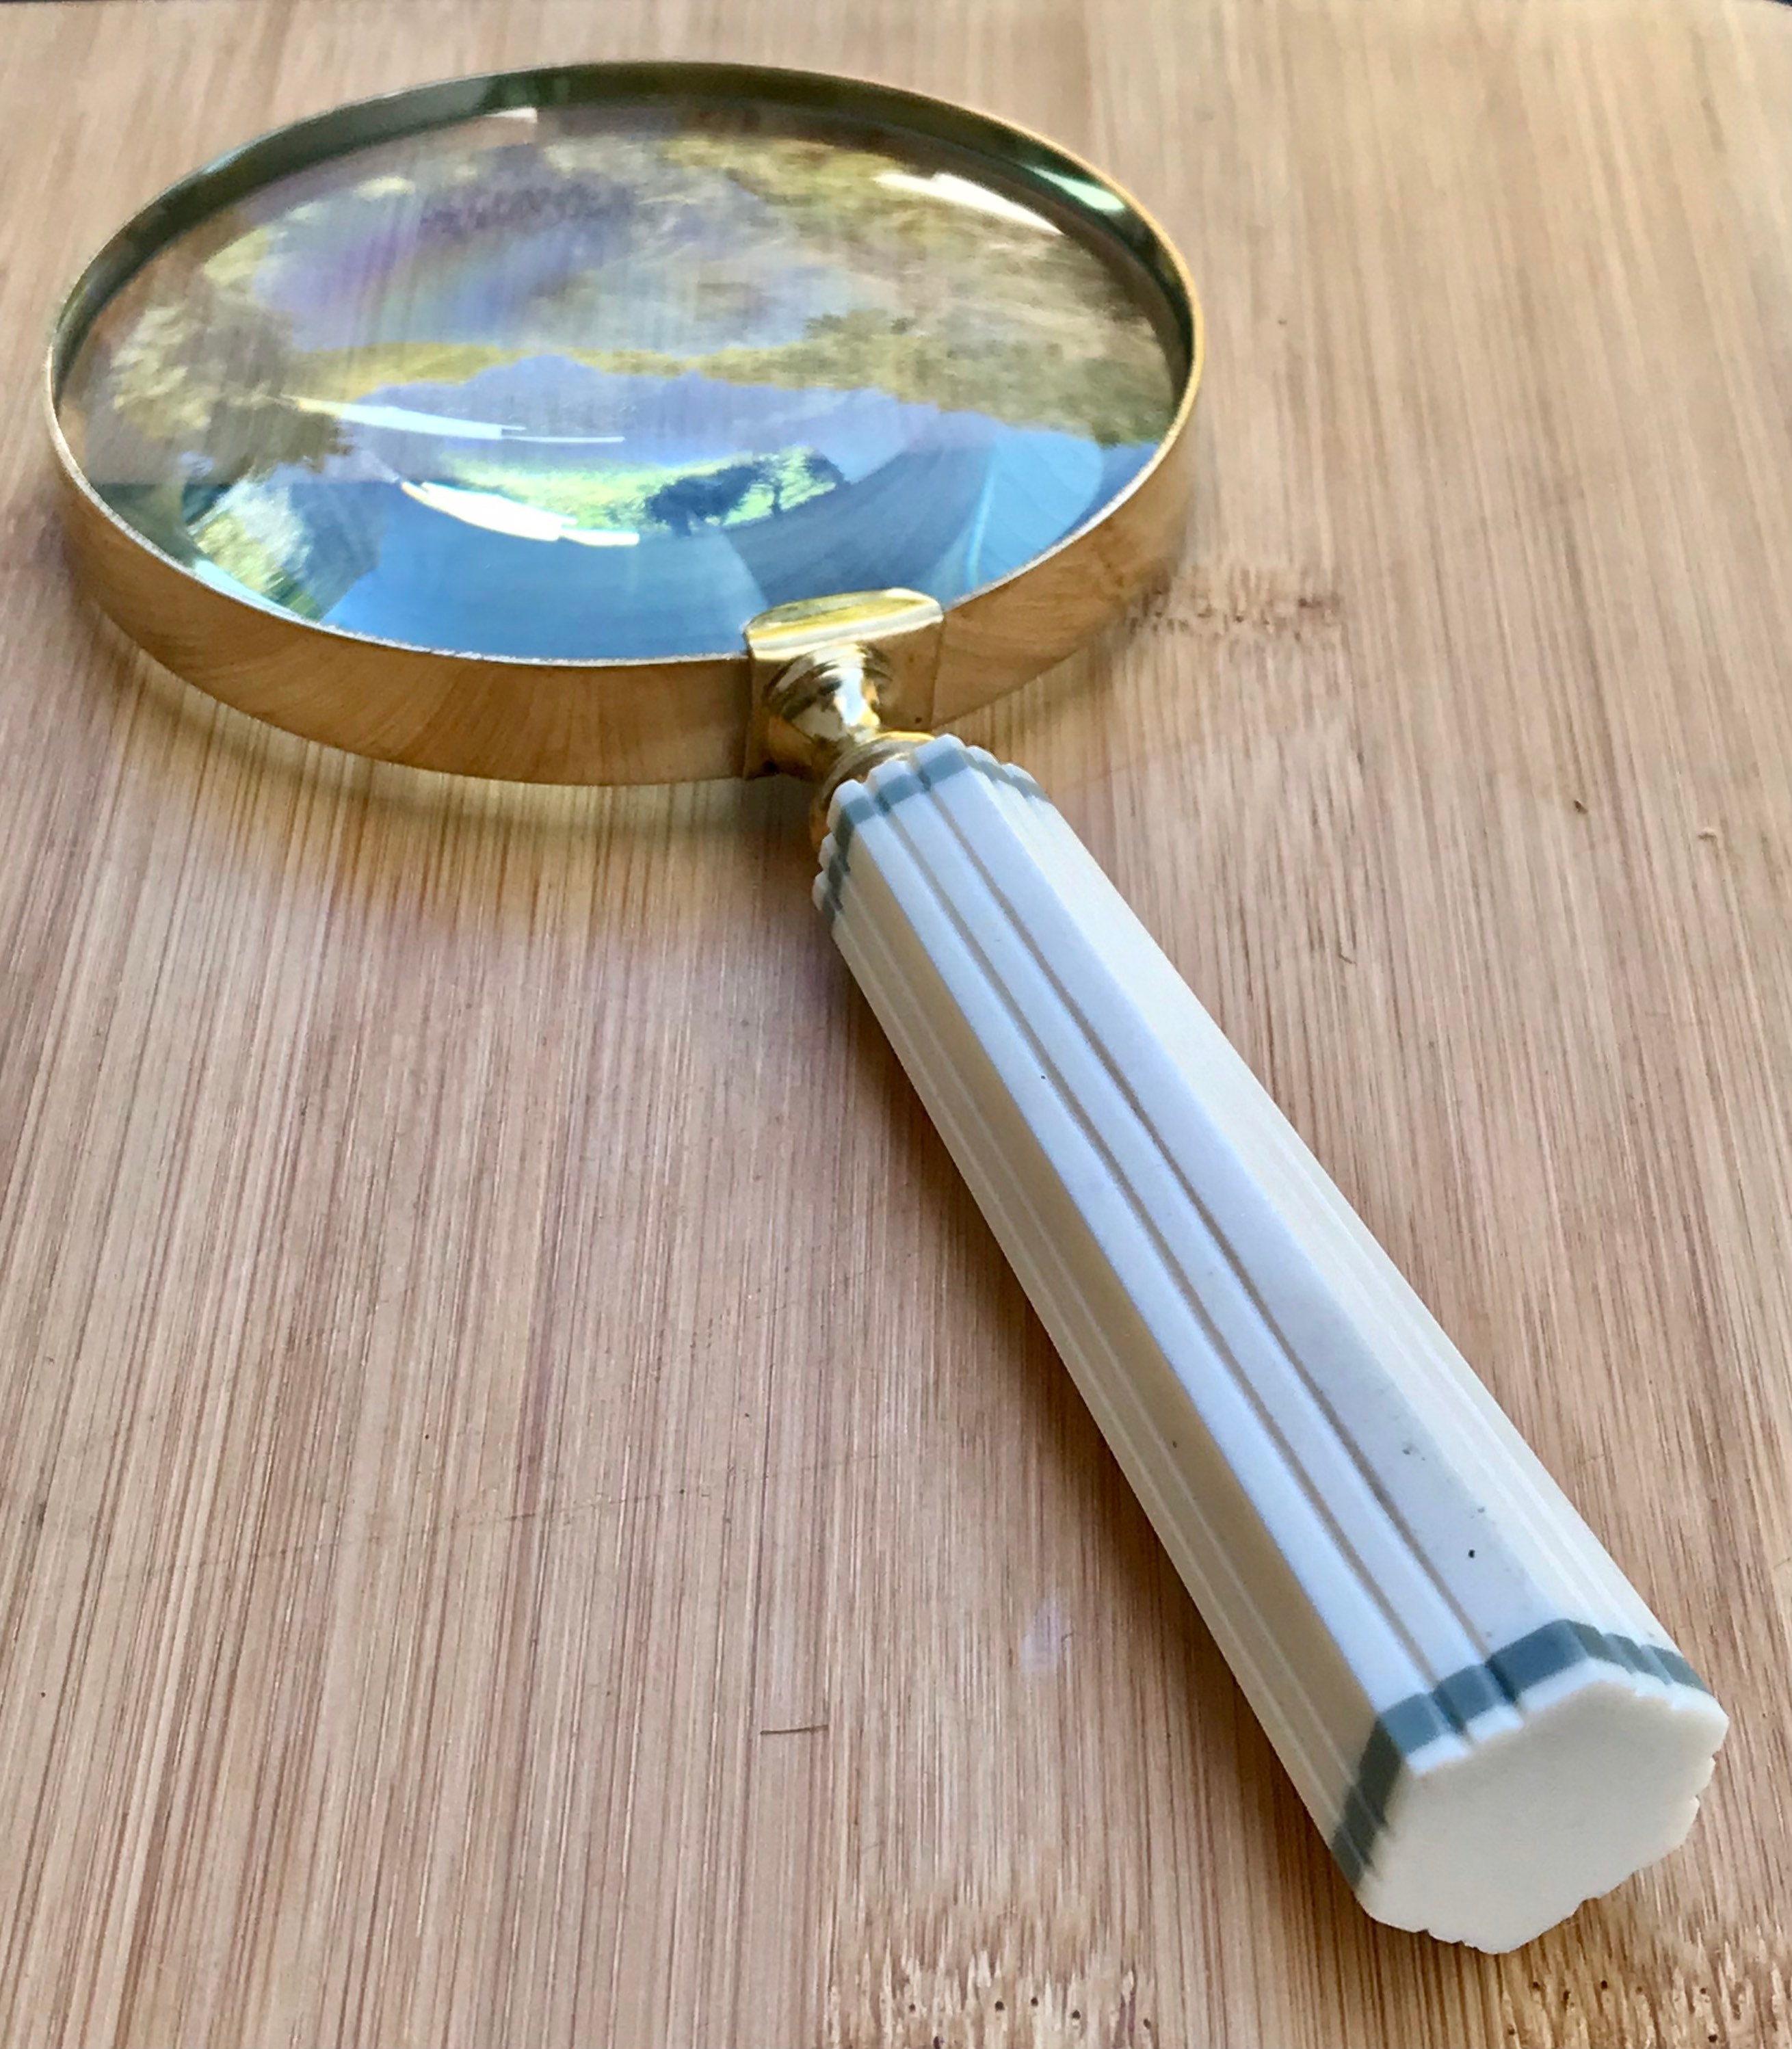 Arc-shaped Magnifying Glass Golden Round Handhold Magnifying